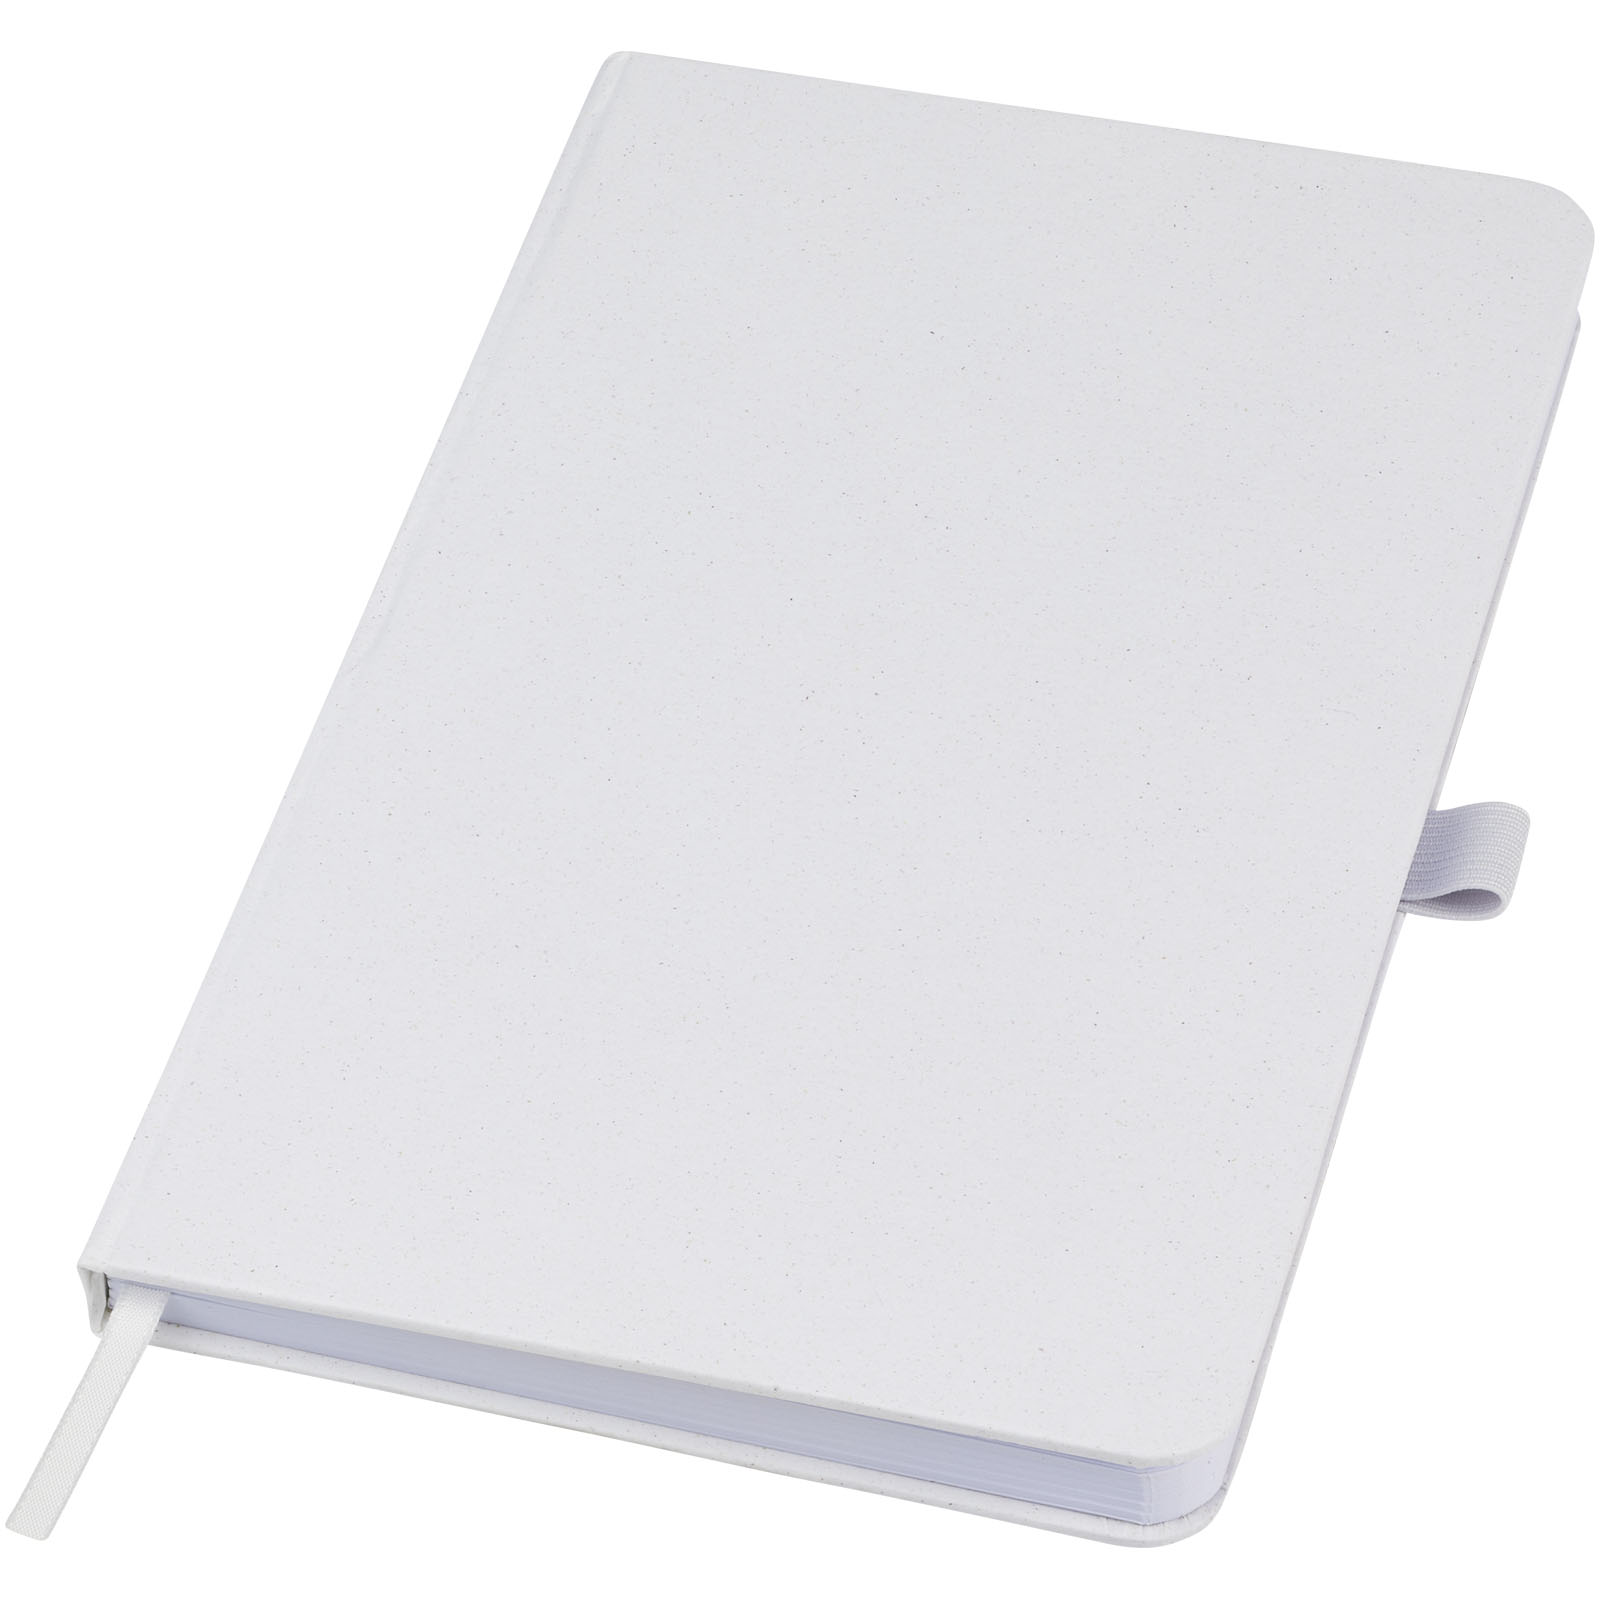 Advertising Hard cover notebooks - Fabianna crush paper hard cover notebook - 0